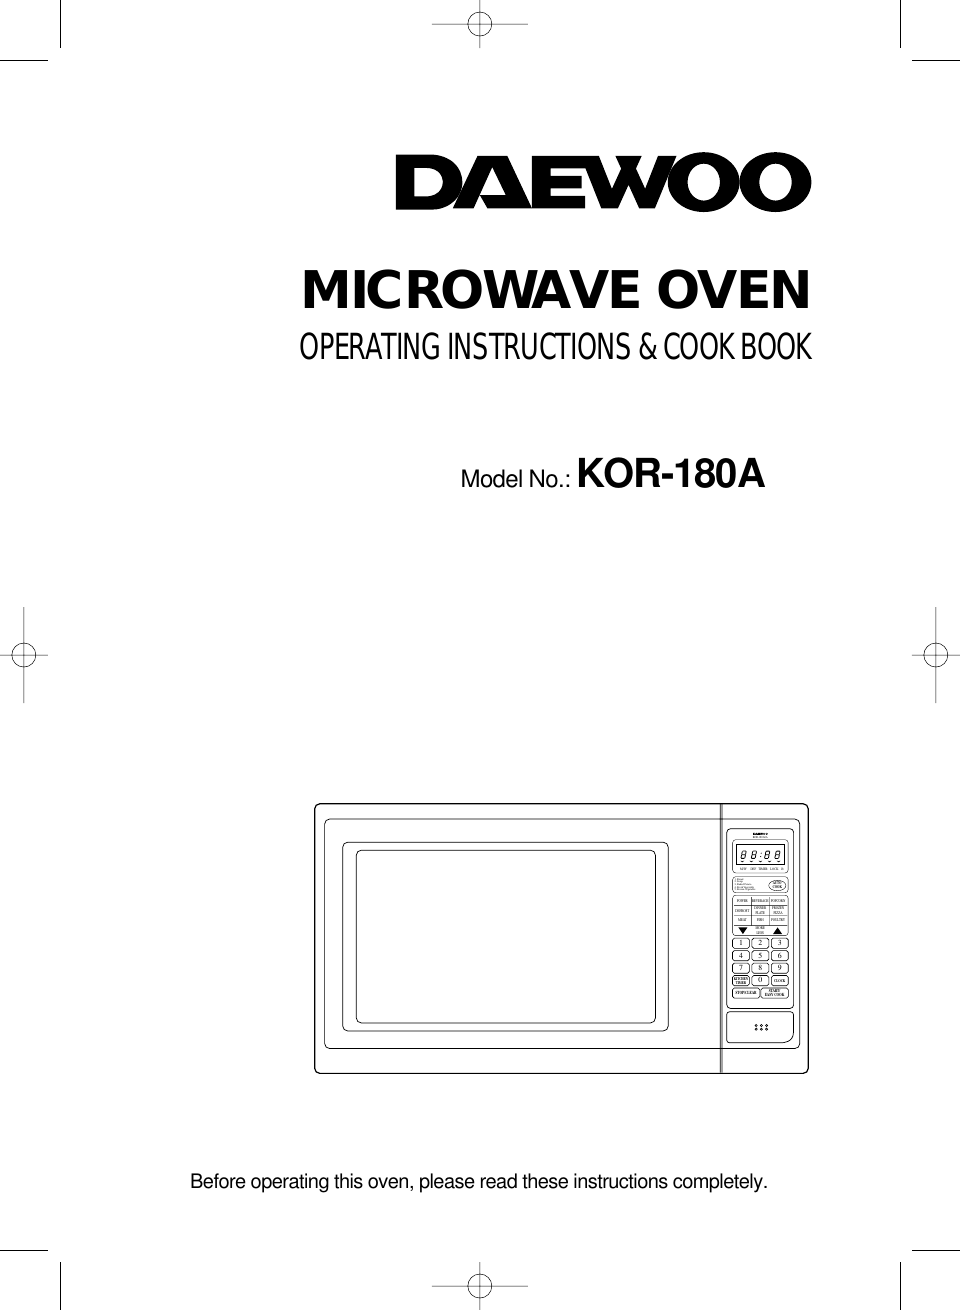 MICROWAVE OVENOPERATING INSTRUCTIONS &amp; COOK BOOKModel No.: KOR-180ABefore operating this oven, please read these instructions completely.1 2 34 5 67 8 90STOP/CLEARKITCHENTIMER CLOCKAUTOCOOKPOWERDEFROSTMEATBEVERAGEDINNERPLATEFISHMORELESSPOPCORNFROZENPIZZAPOULTRY1. Bread2. Soup3. Baked Potato4. Fresh Vegetable5. Frozen VegetableM/W DEF TIMERKOR-180A0ALOCK lbSTART/EASY COOK 